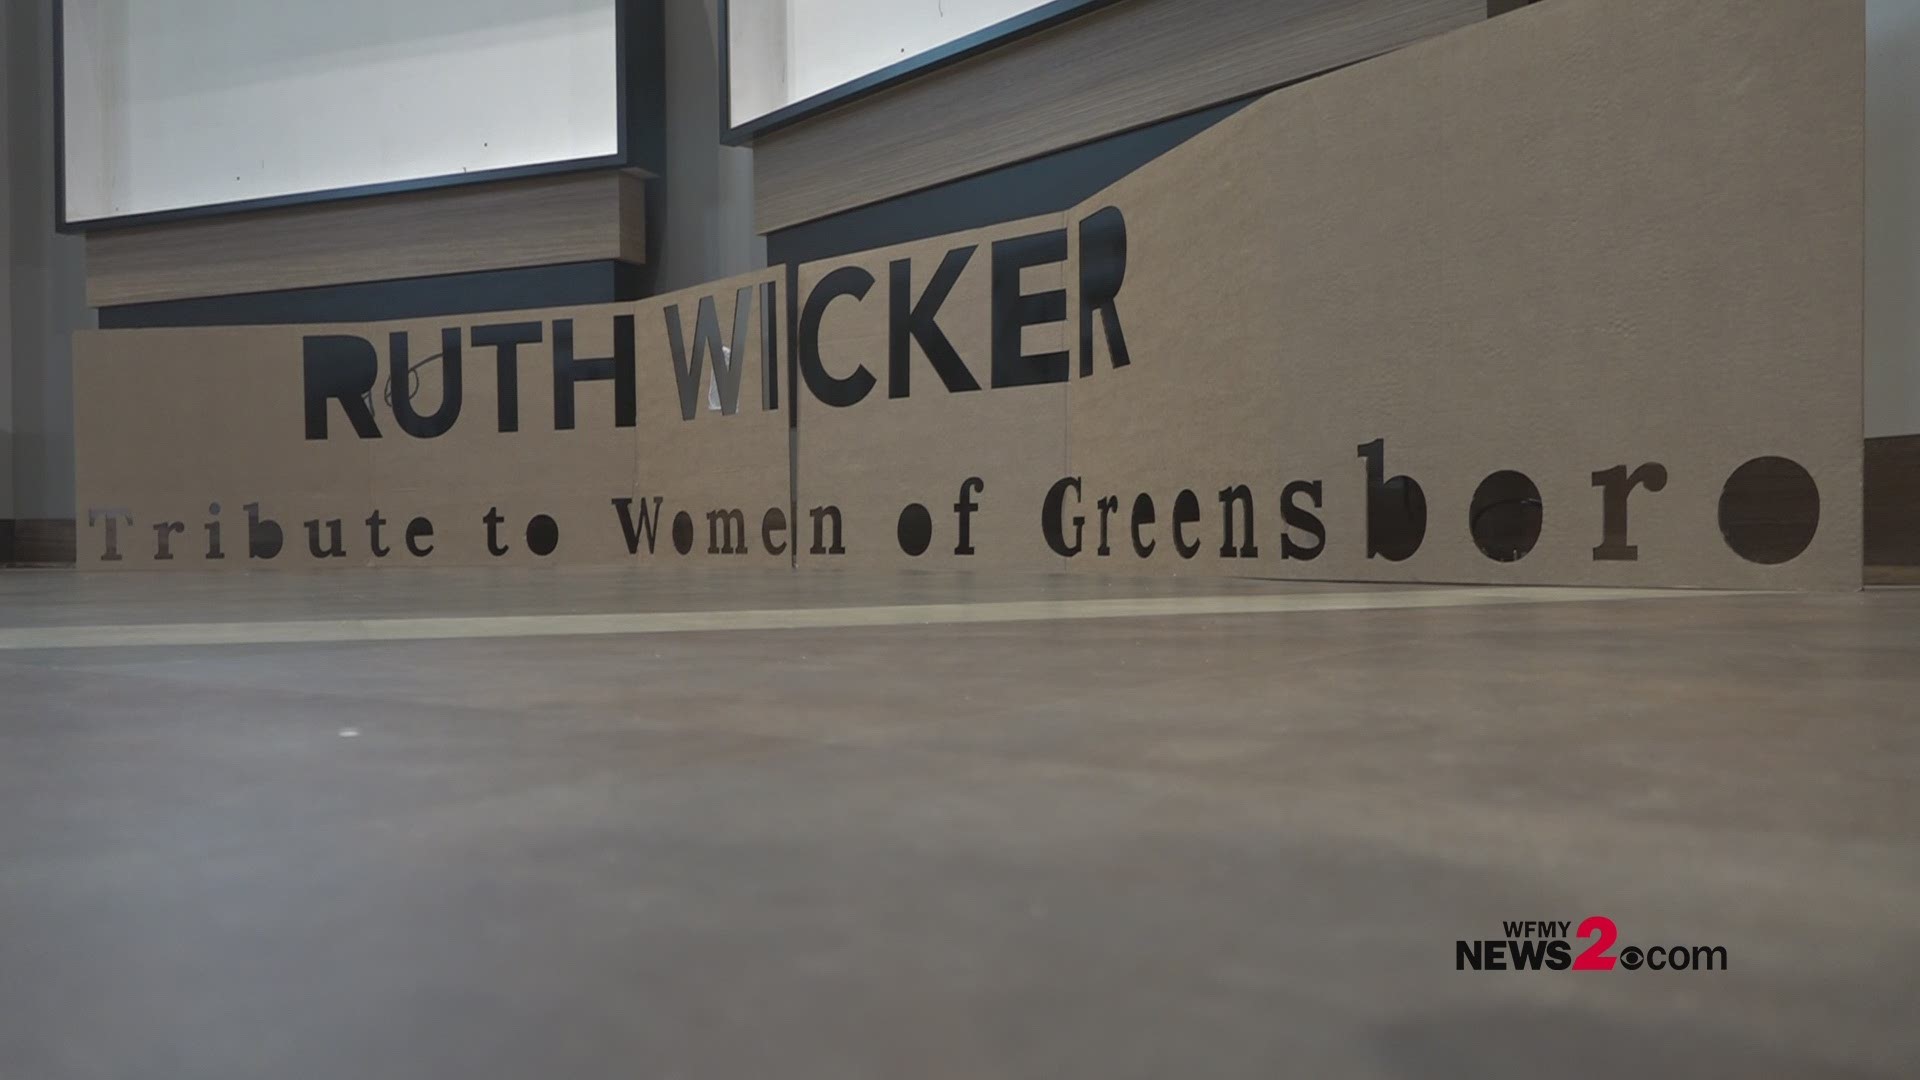 The Ruth Wicker Tribute to Women at the new Barber Park Event Center will feature over 30 women for their achievements and commitment to the city of Greensboro.